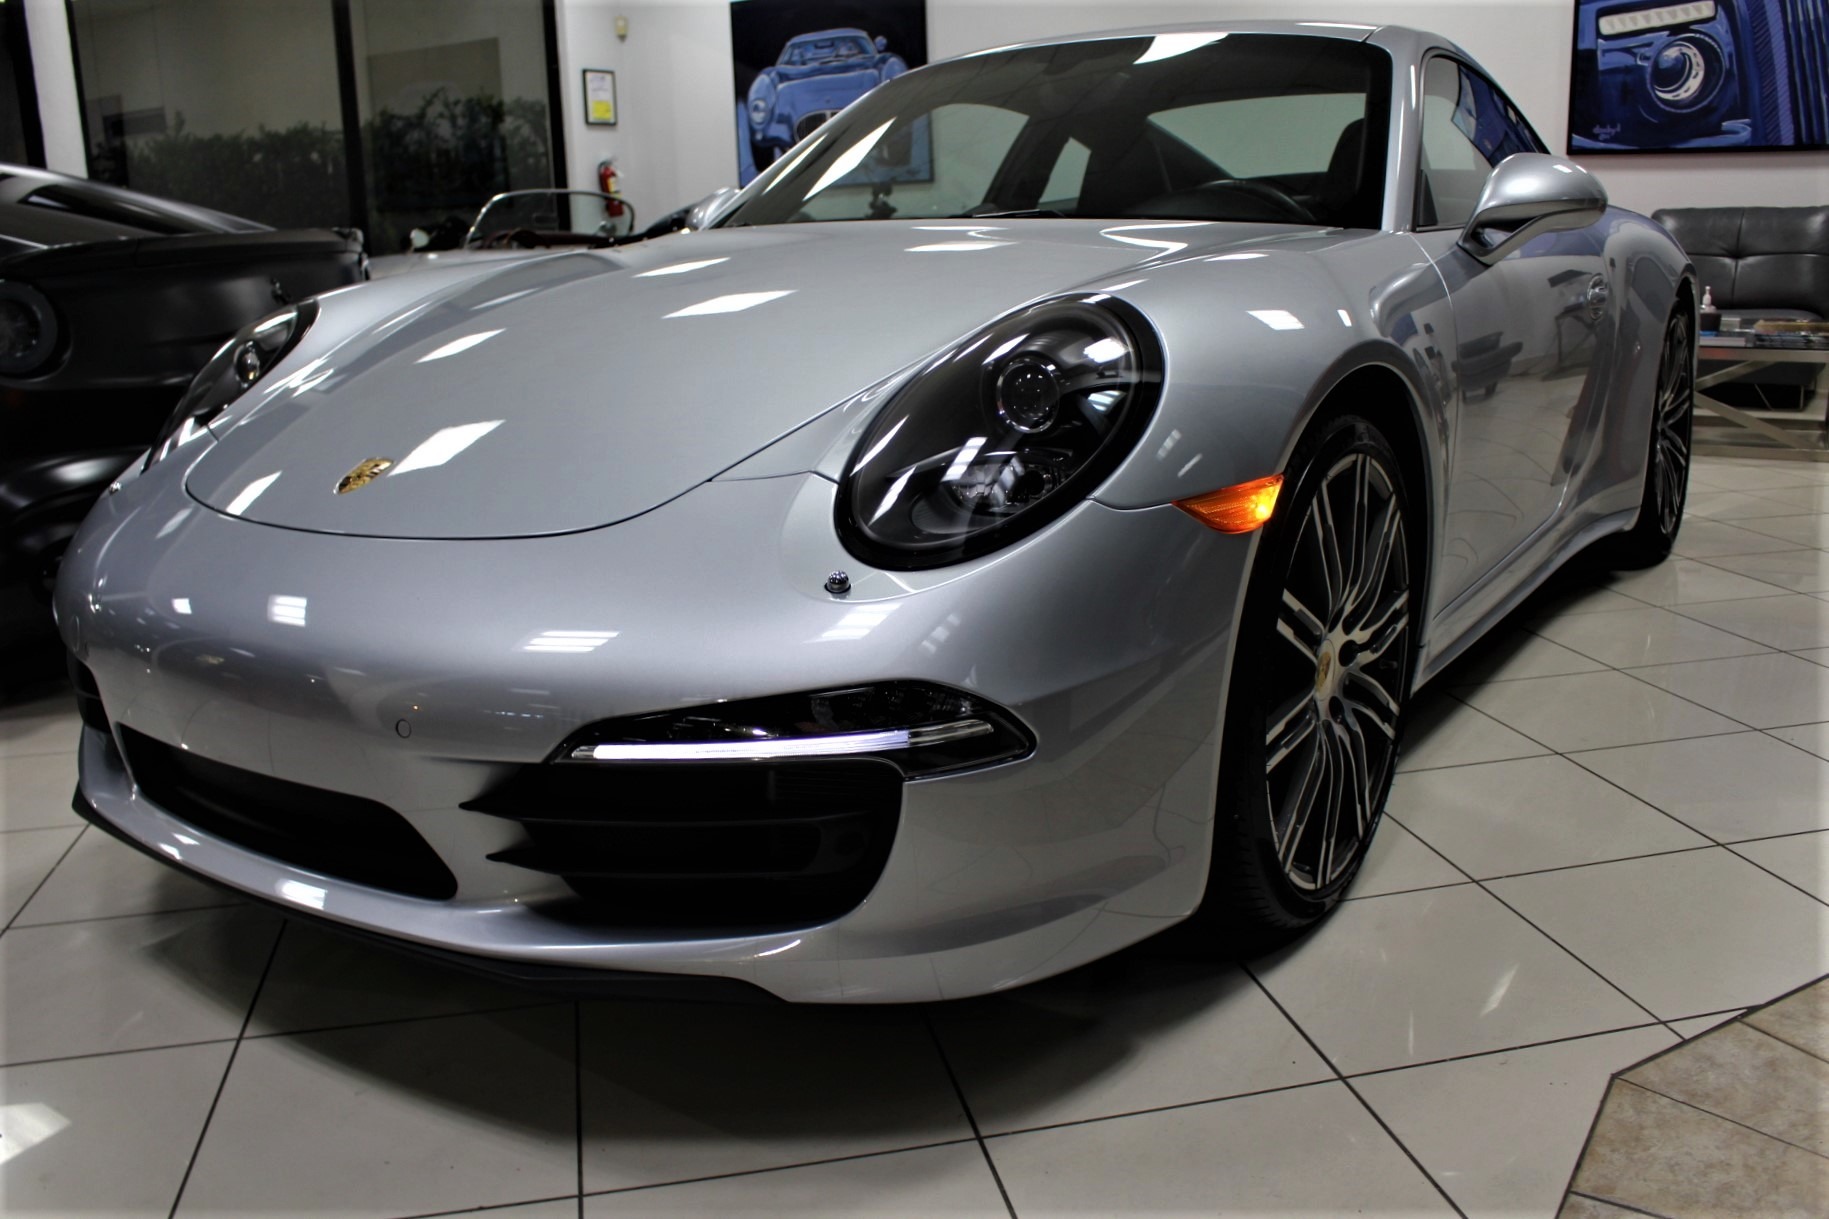 Used 2016 Porsche 911 Carrera 4S for sale Sold at The Gables Sports Cars in Miami FL 33146 3